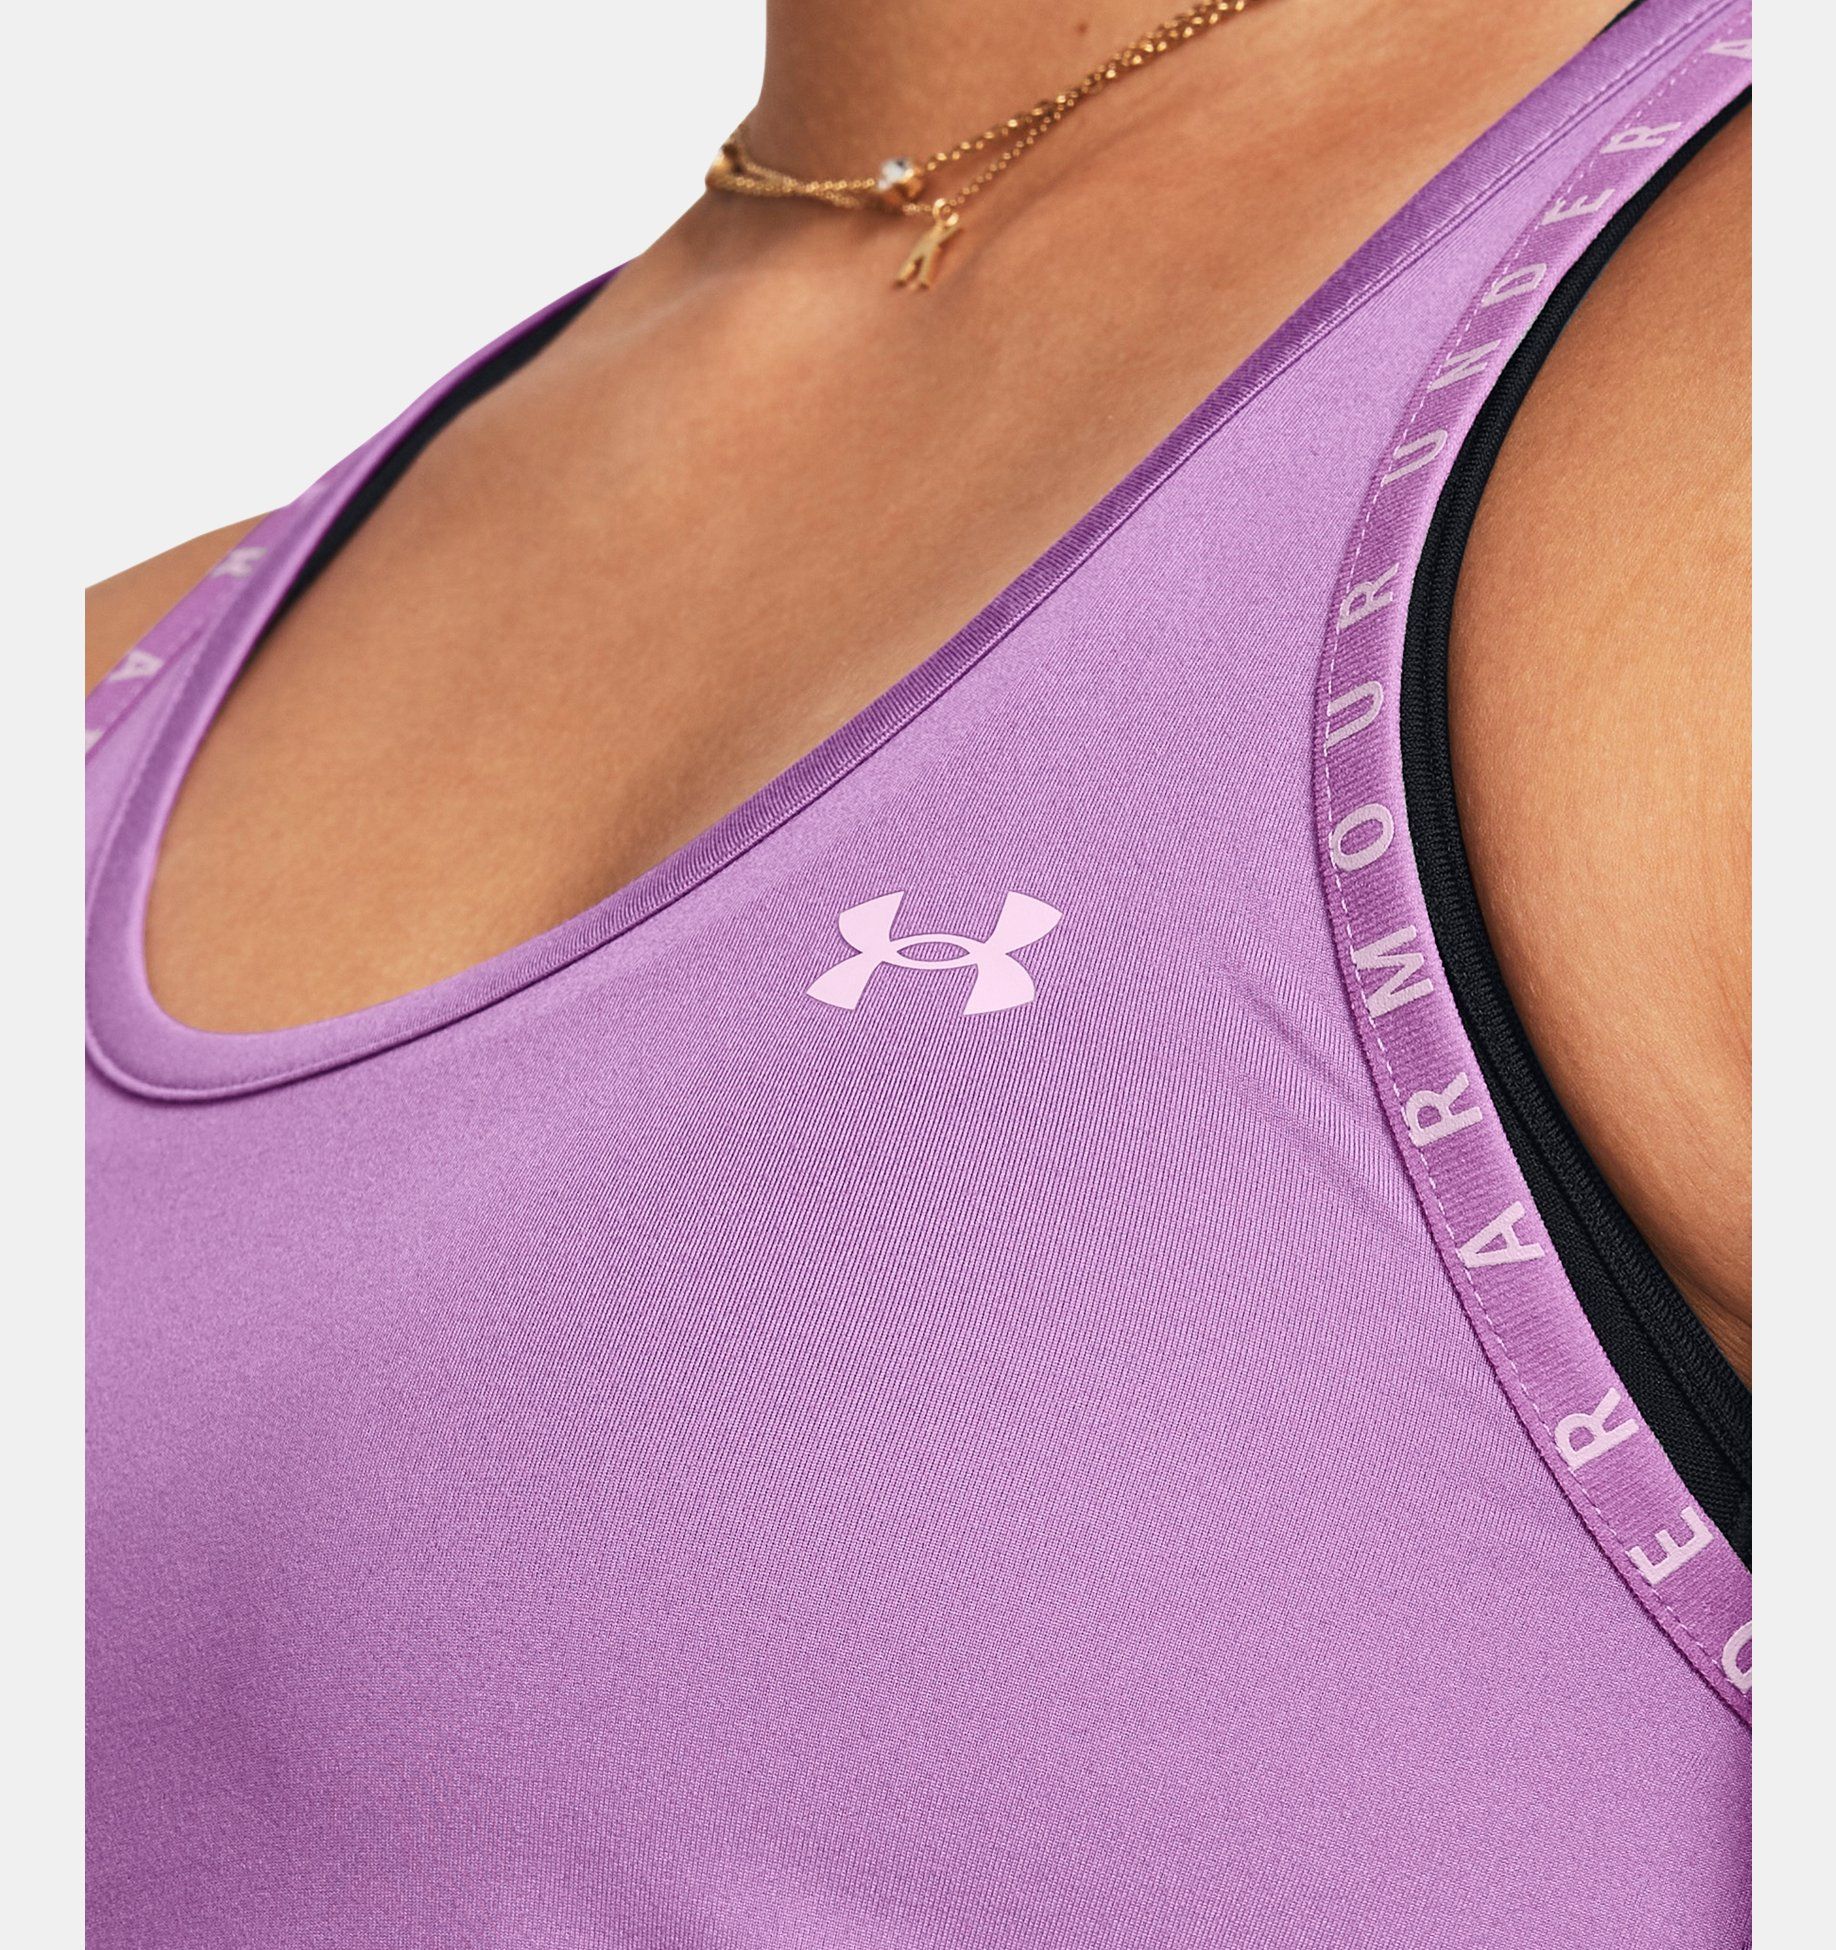 UNDER ARMOUR KNOCKOUT TANK (1351596-560)